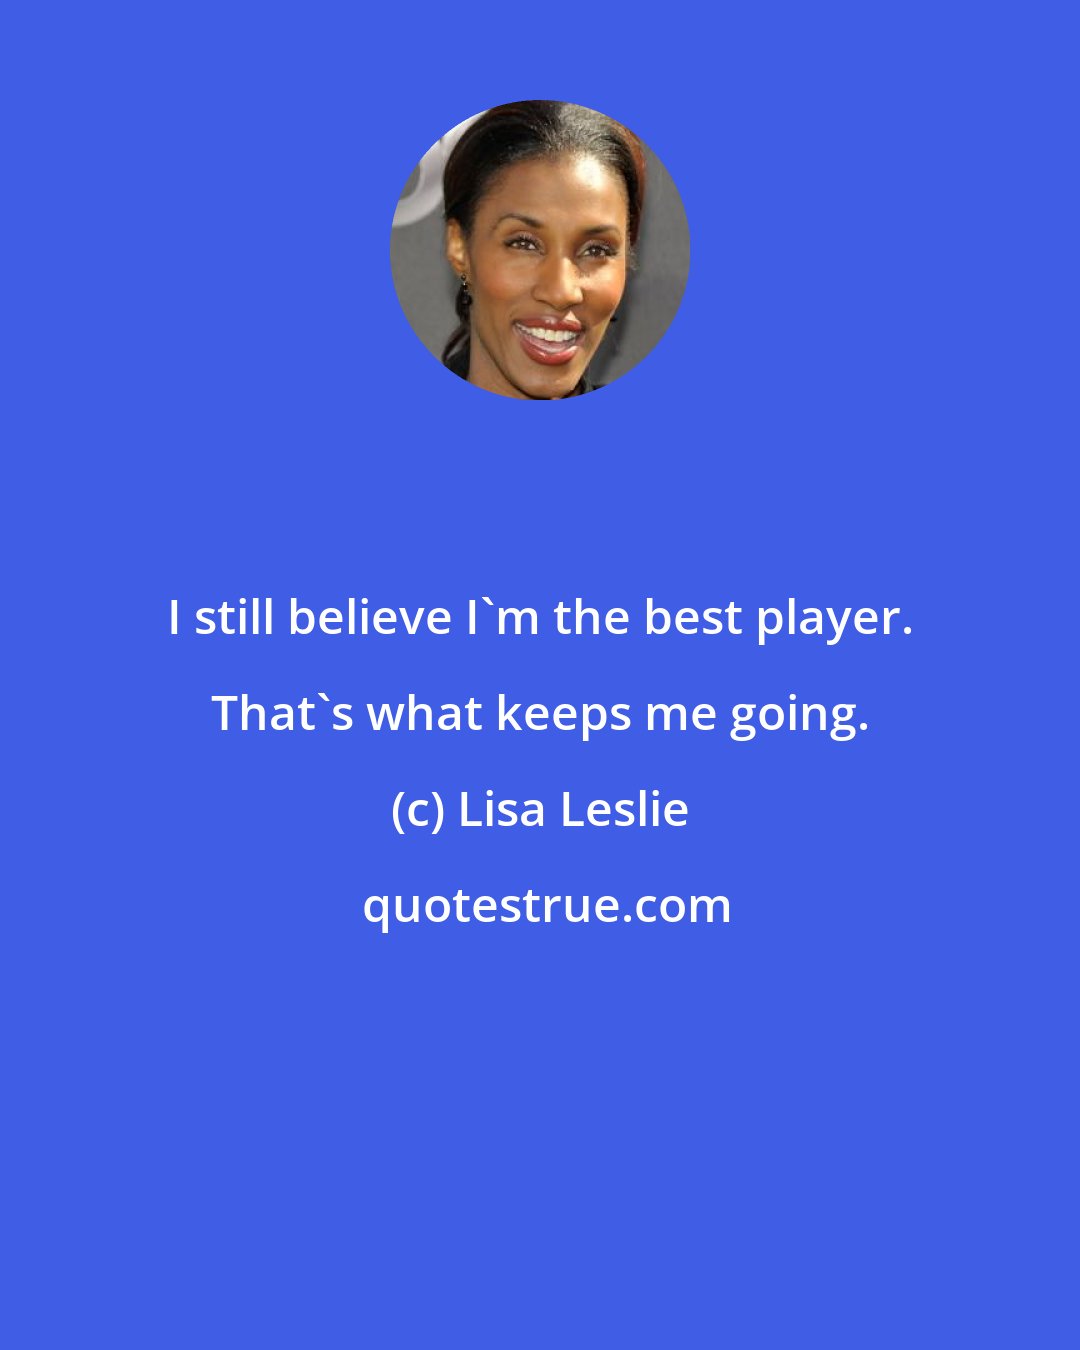 Lisa Leslie: I still believe I'm the best player. That's what keeps me going.